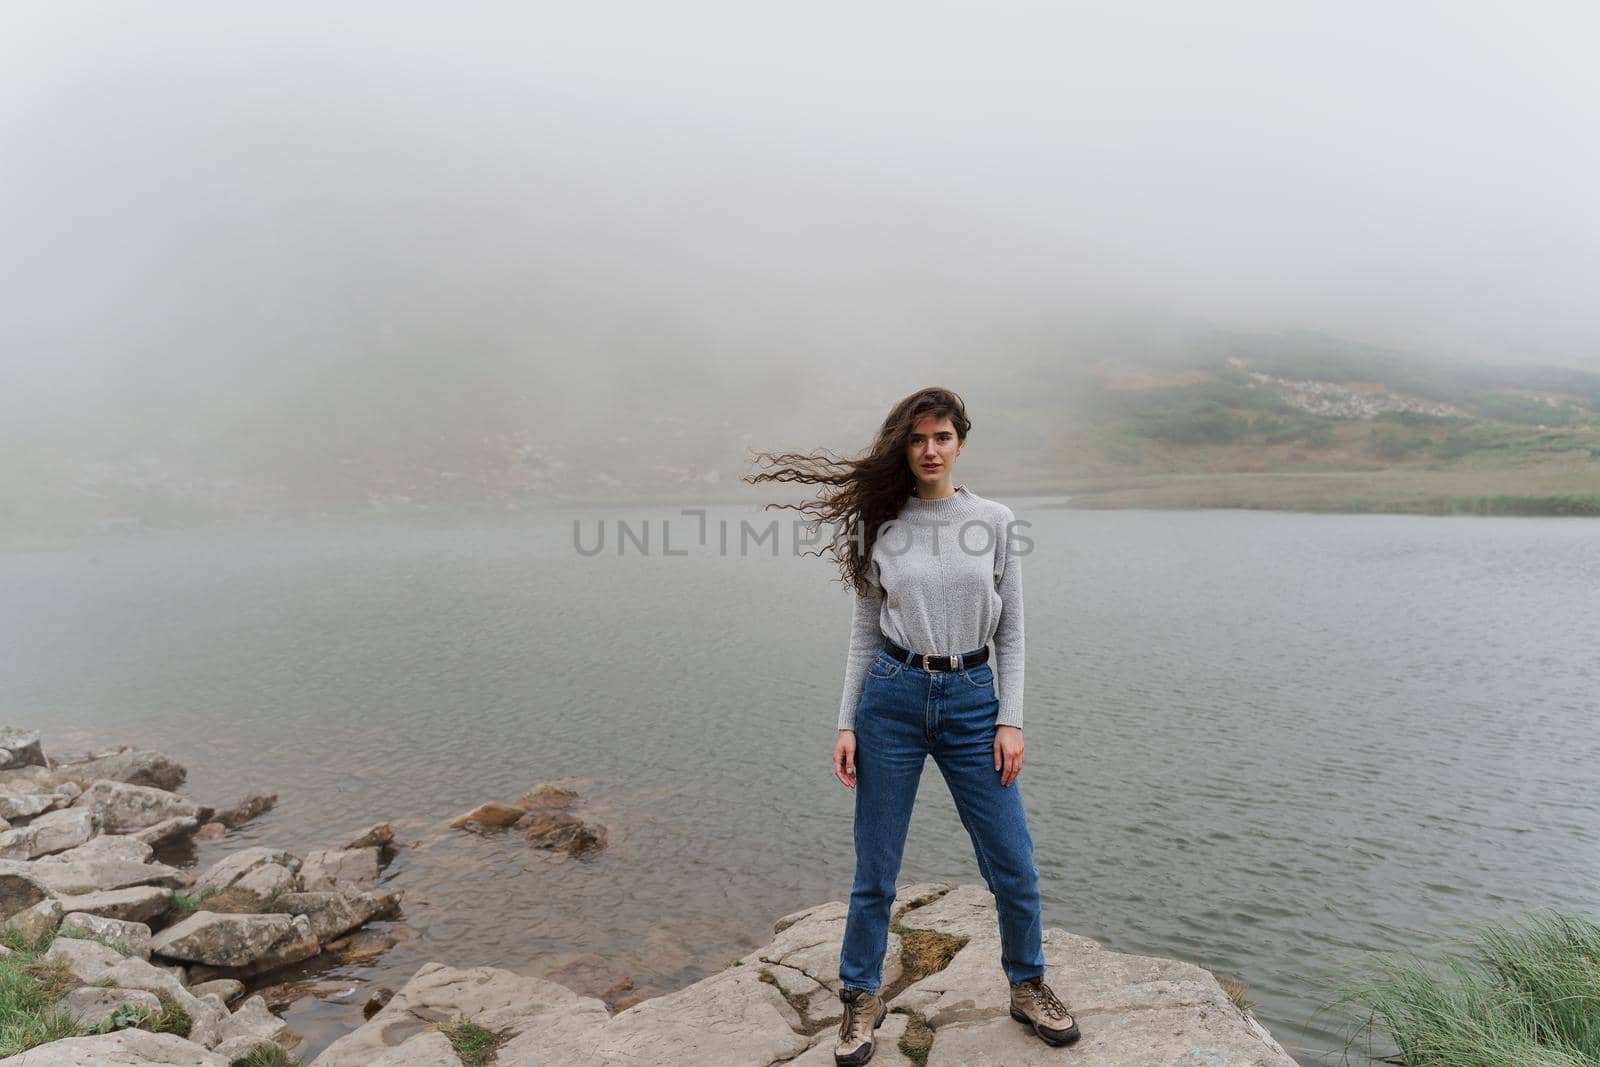 Lake at the peak of the mountain. Foggy lake. Girl is posing on the rocks.